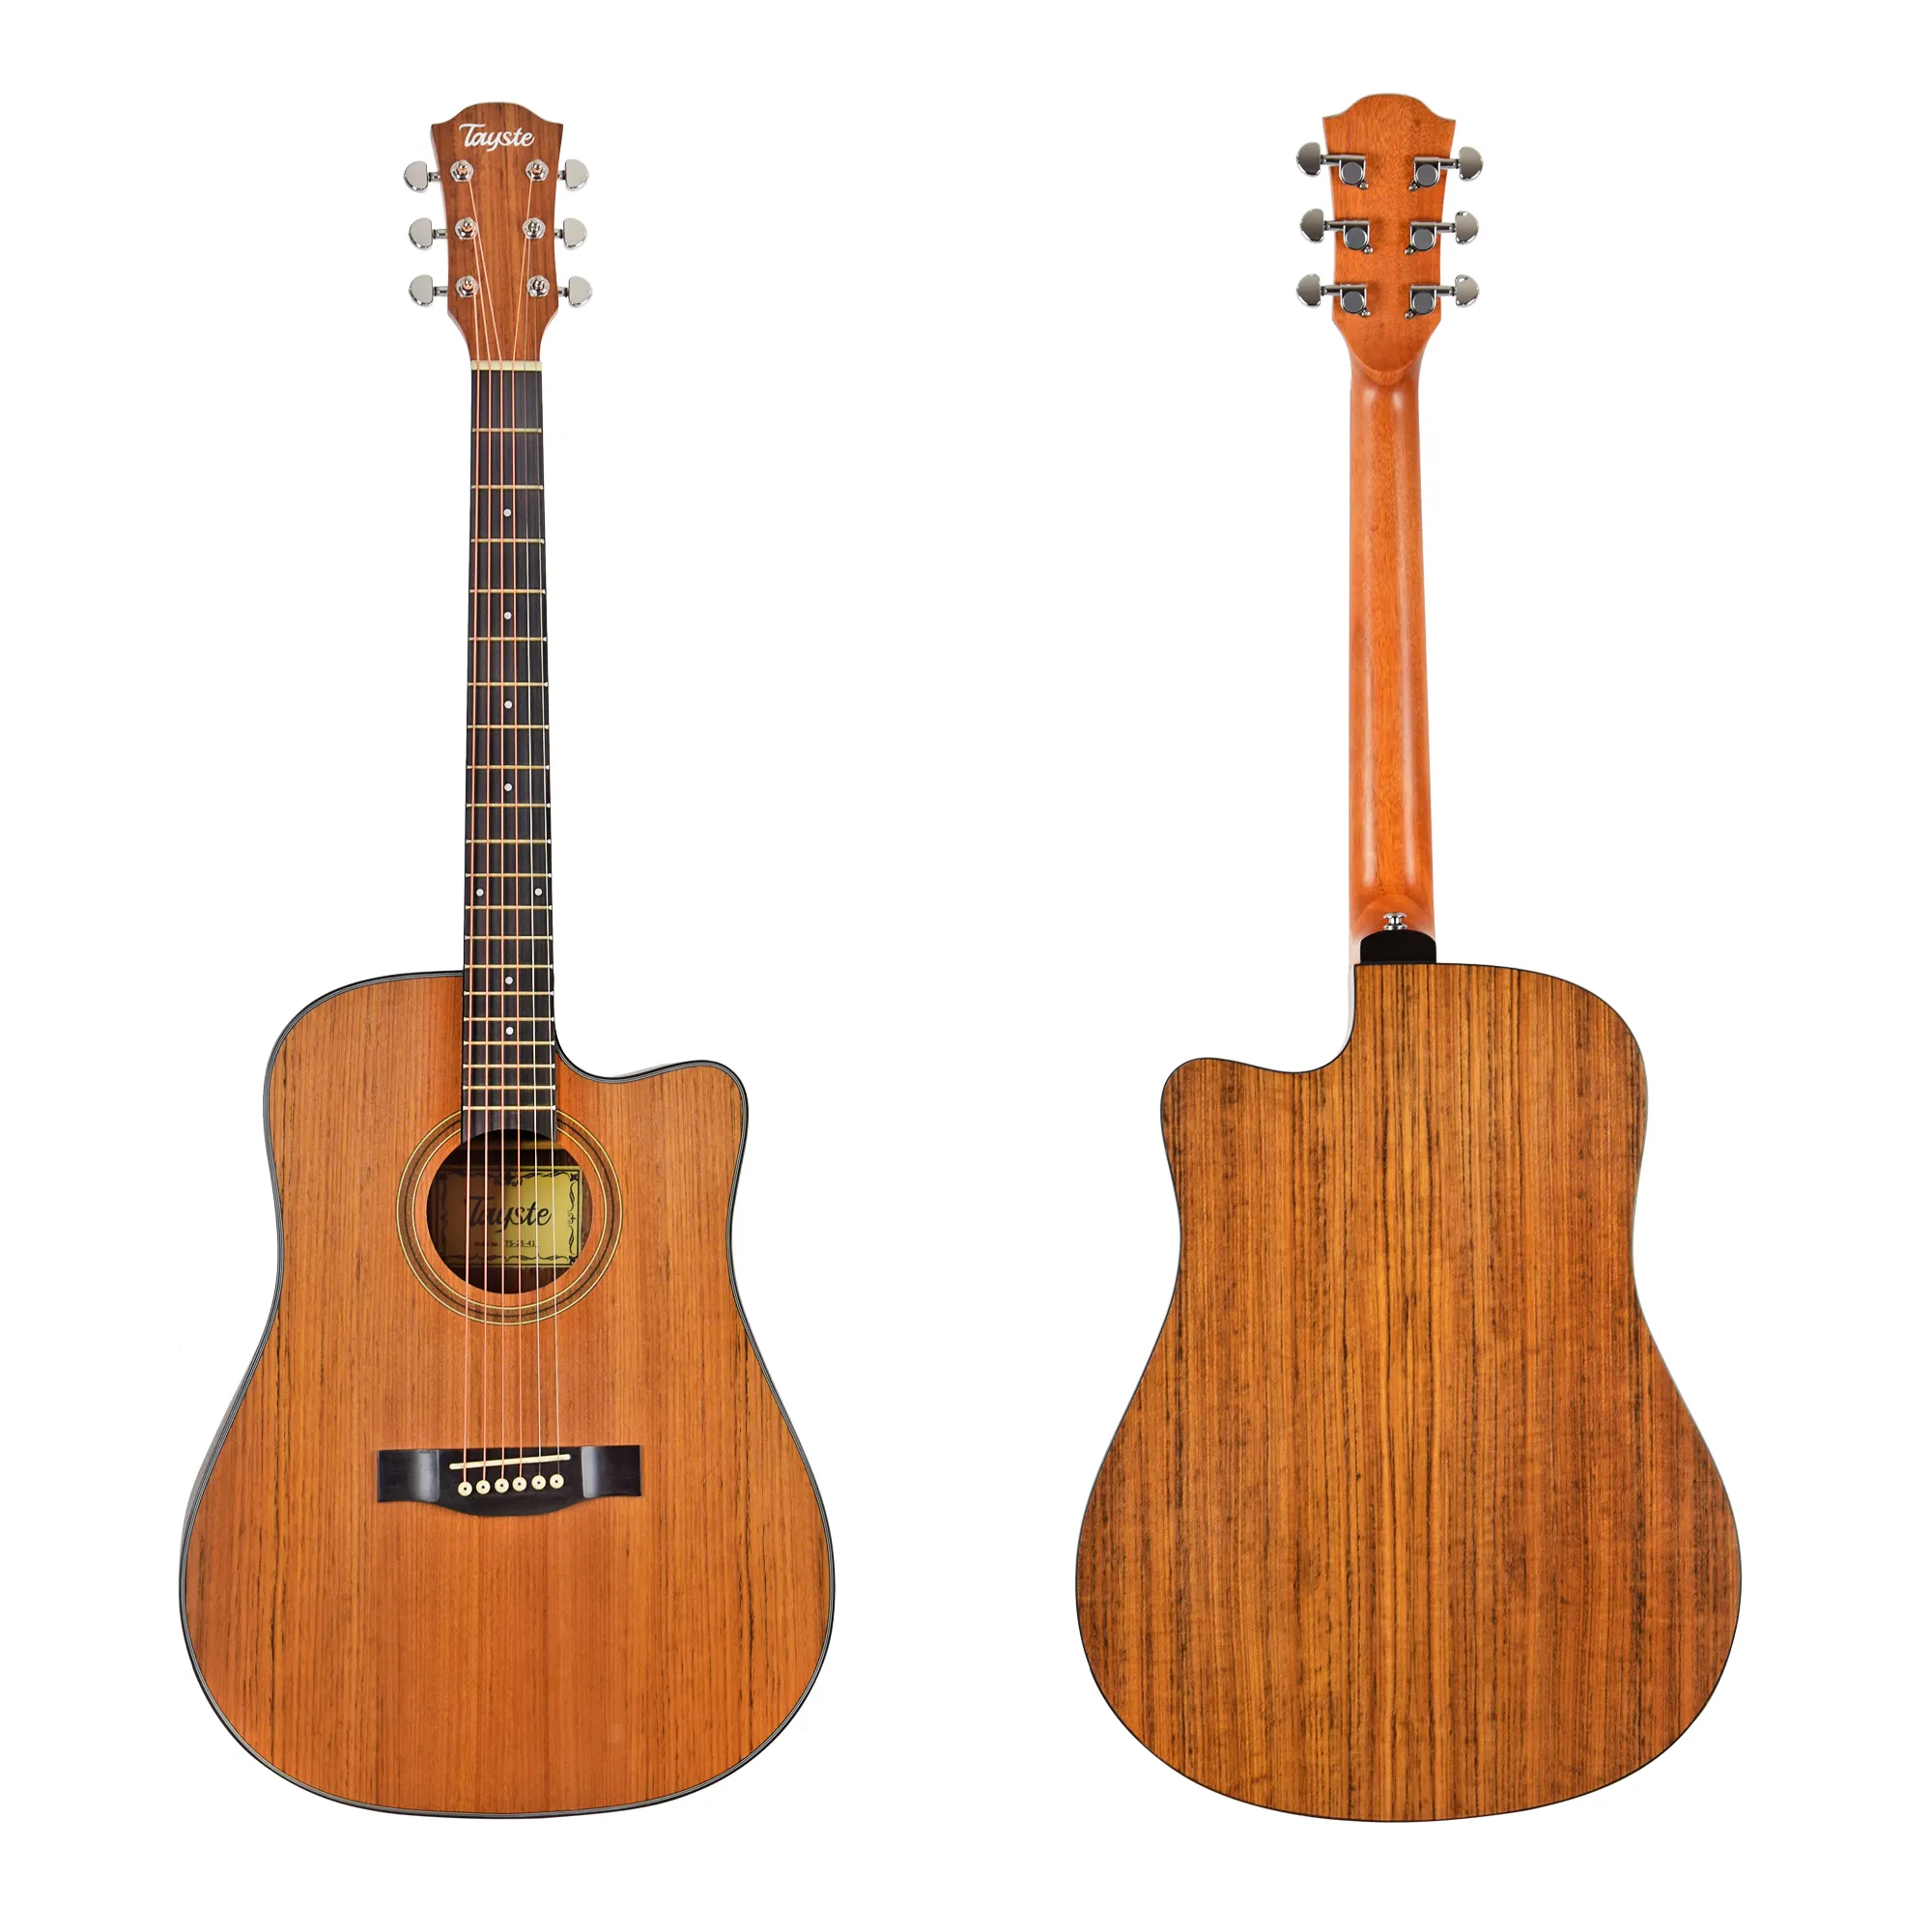 Tayste 41inch wooden acoustic guitar with Die cast keys